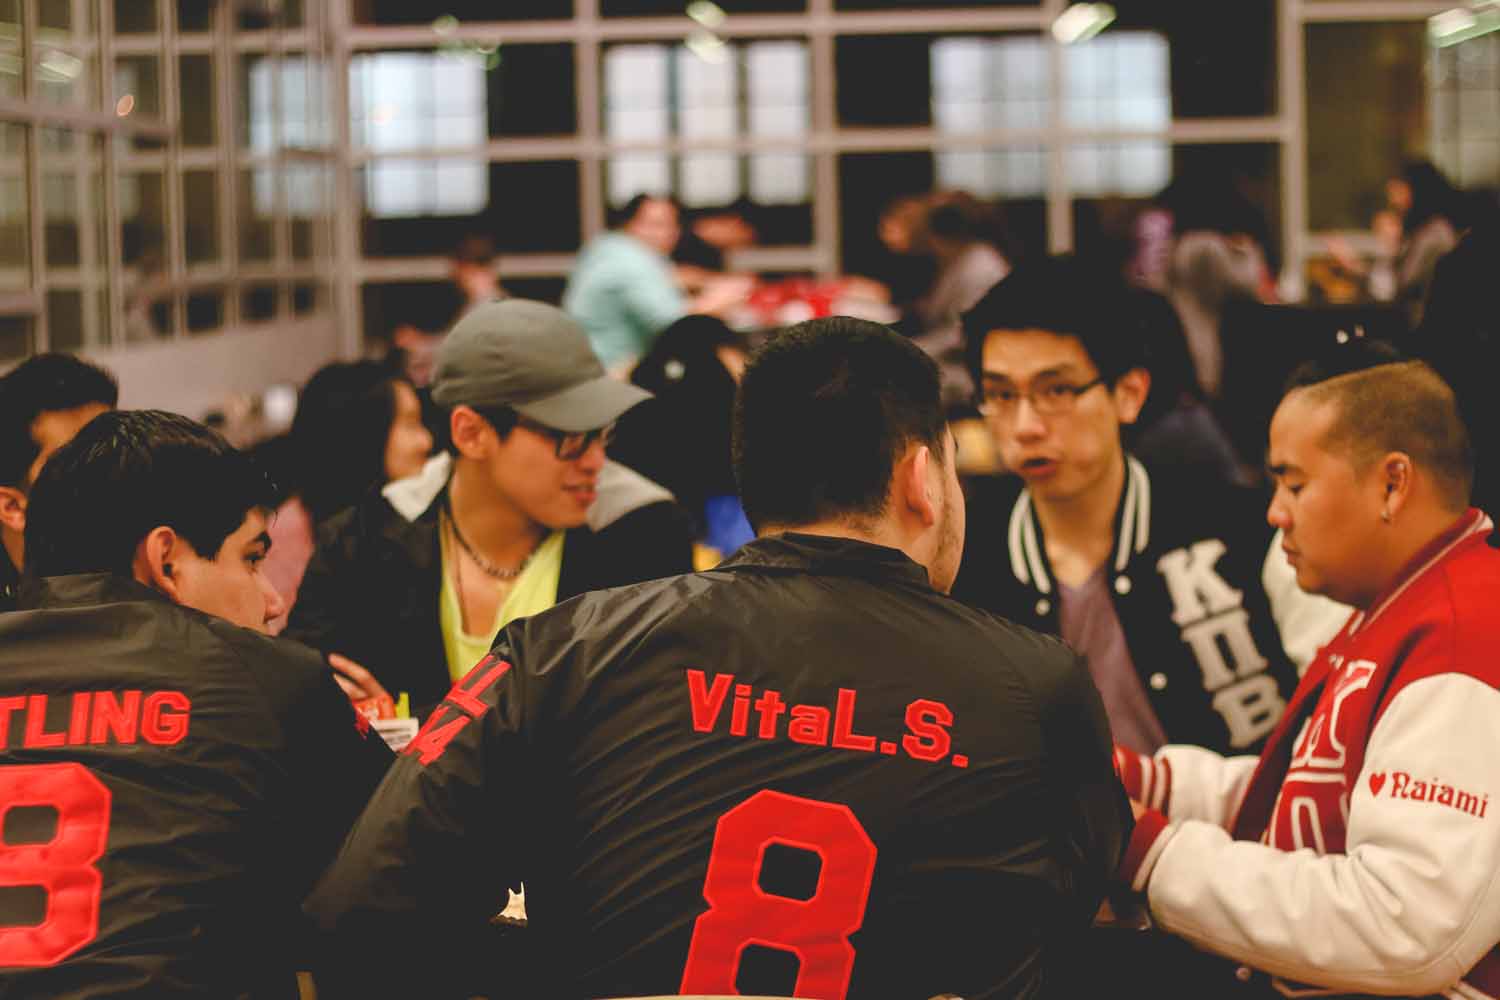 Members of Kappa Pi Beta, an Asian American-founded service and social fraternity on campus, share a meal at the welcome party. Photo by Hanna Yowell.